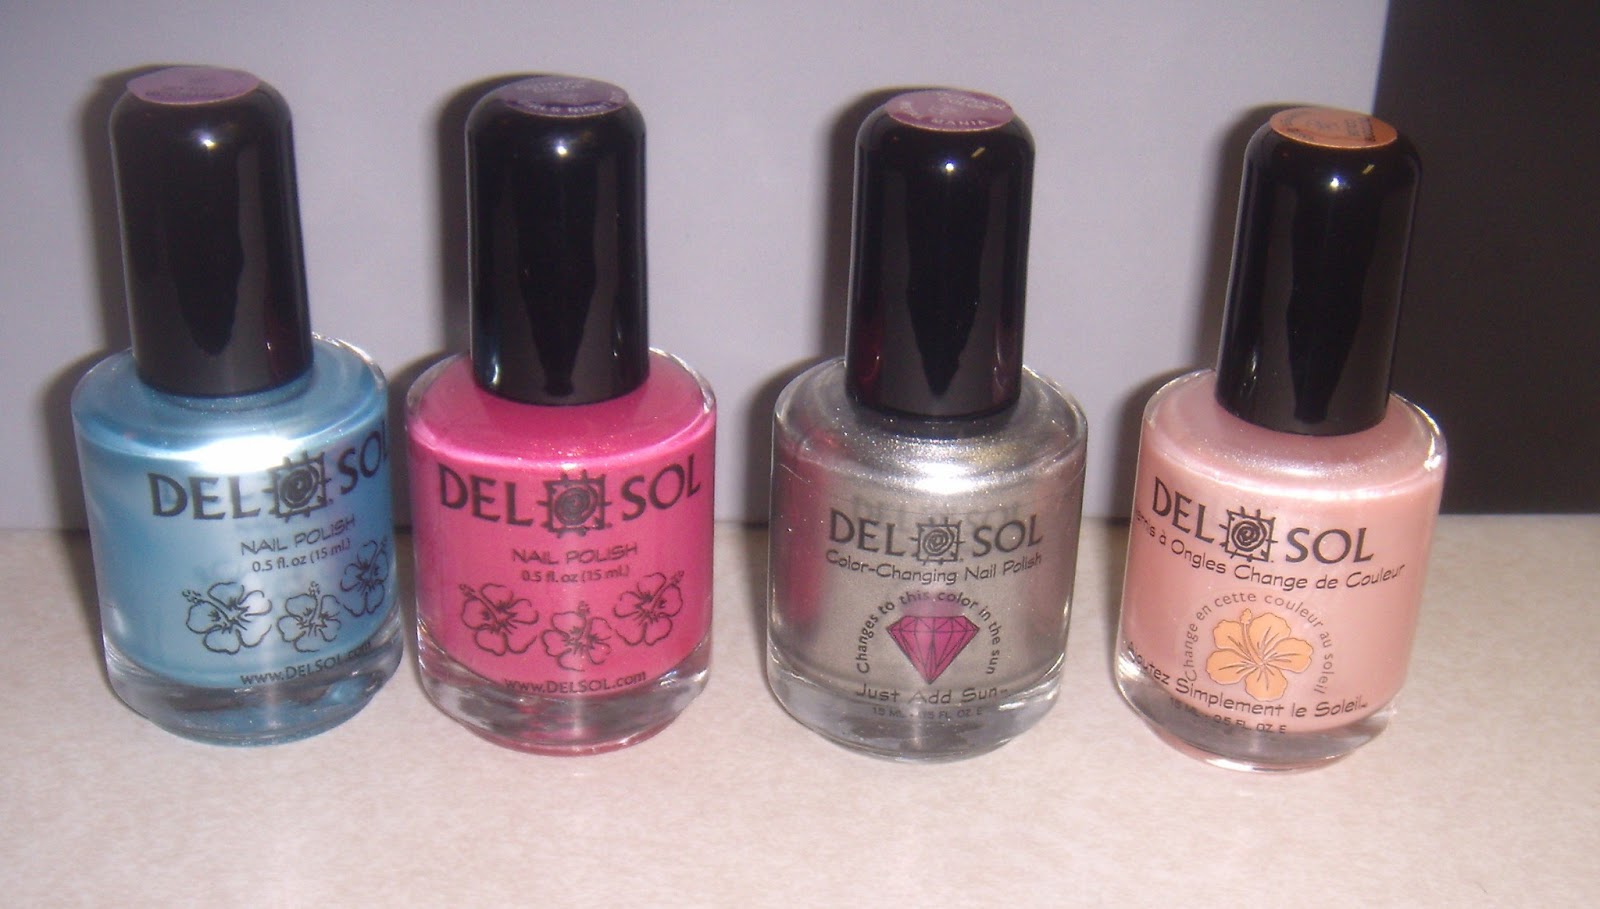 1. Color Changing Nail Polish - Del Sol - wide 6